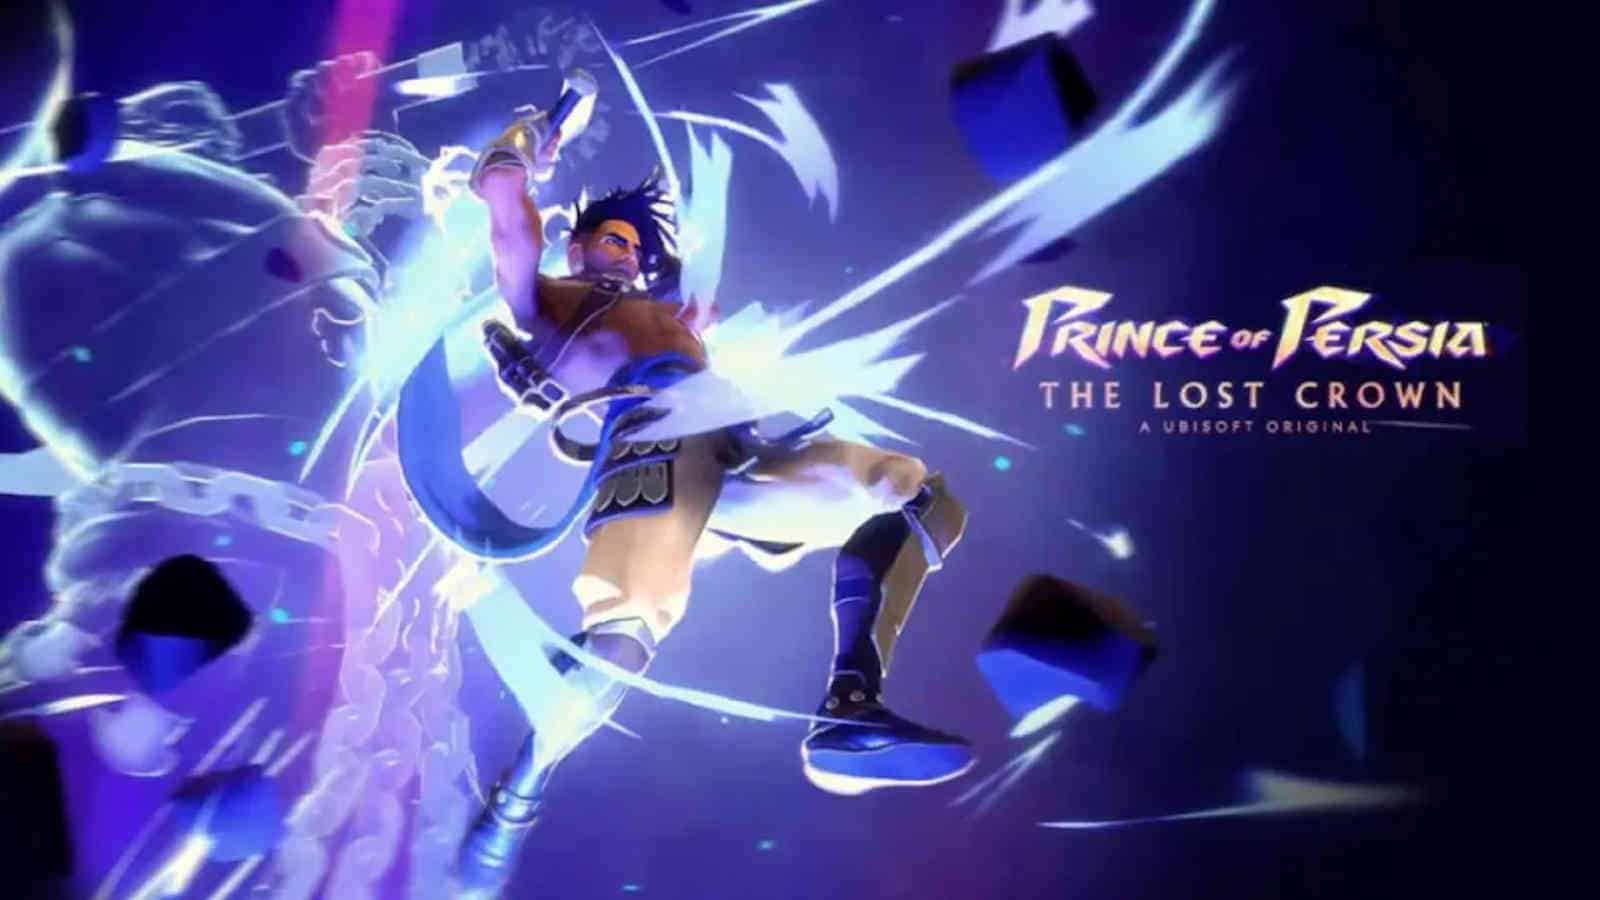 Prince of Persia: The Lost Crown game release